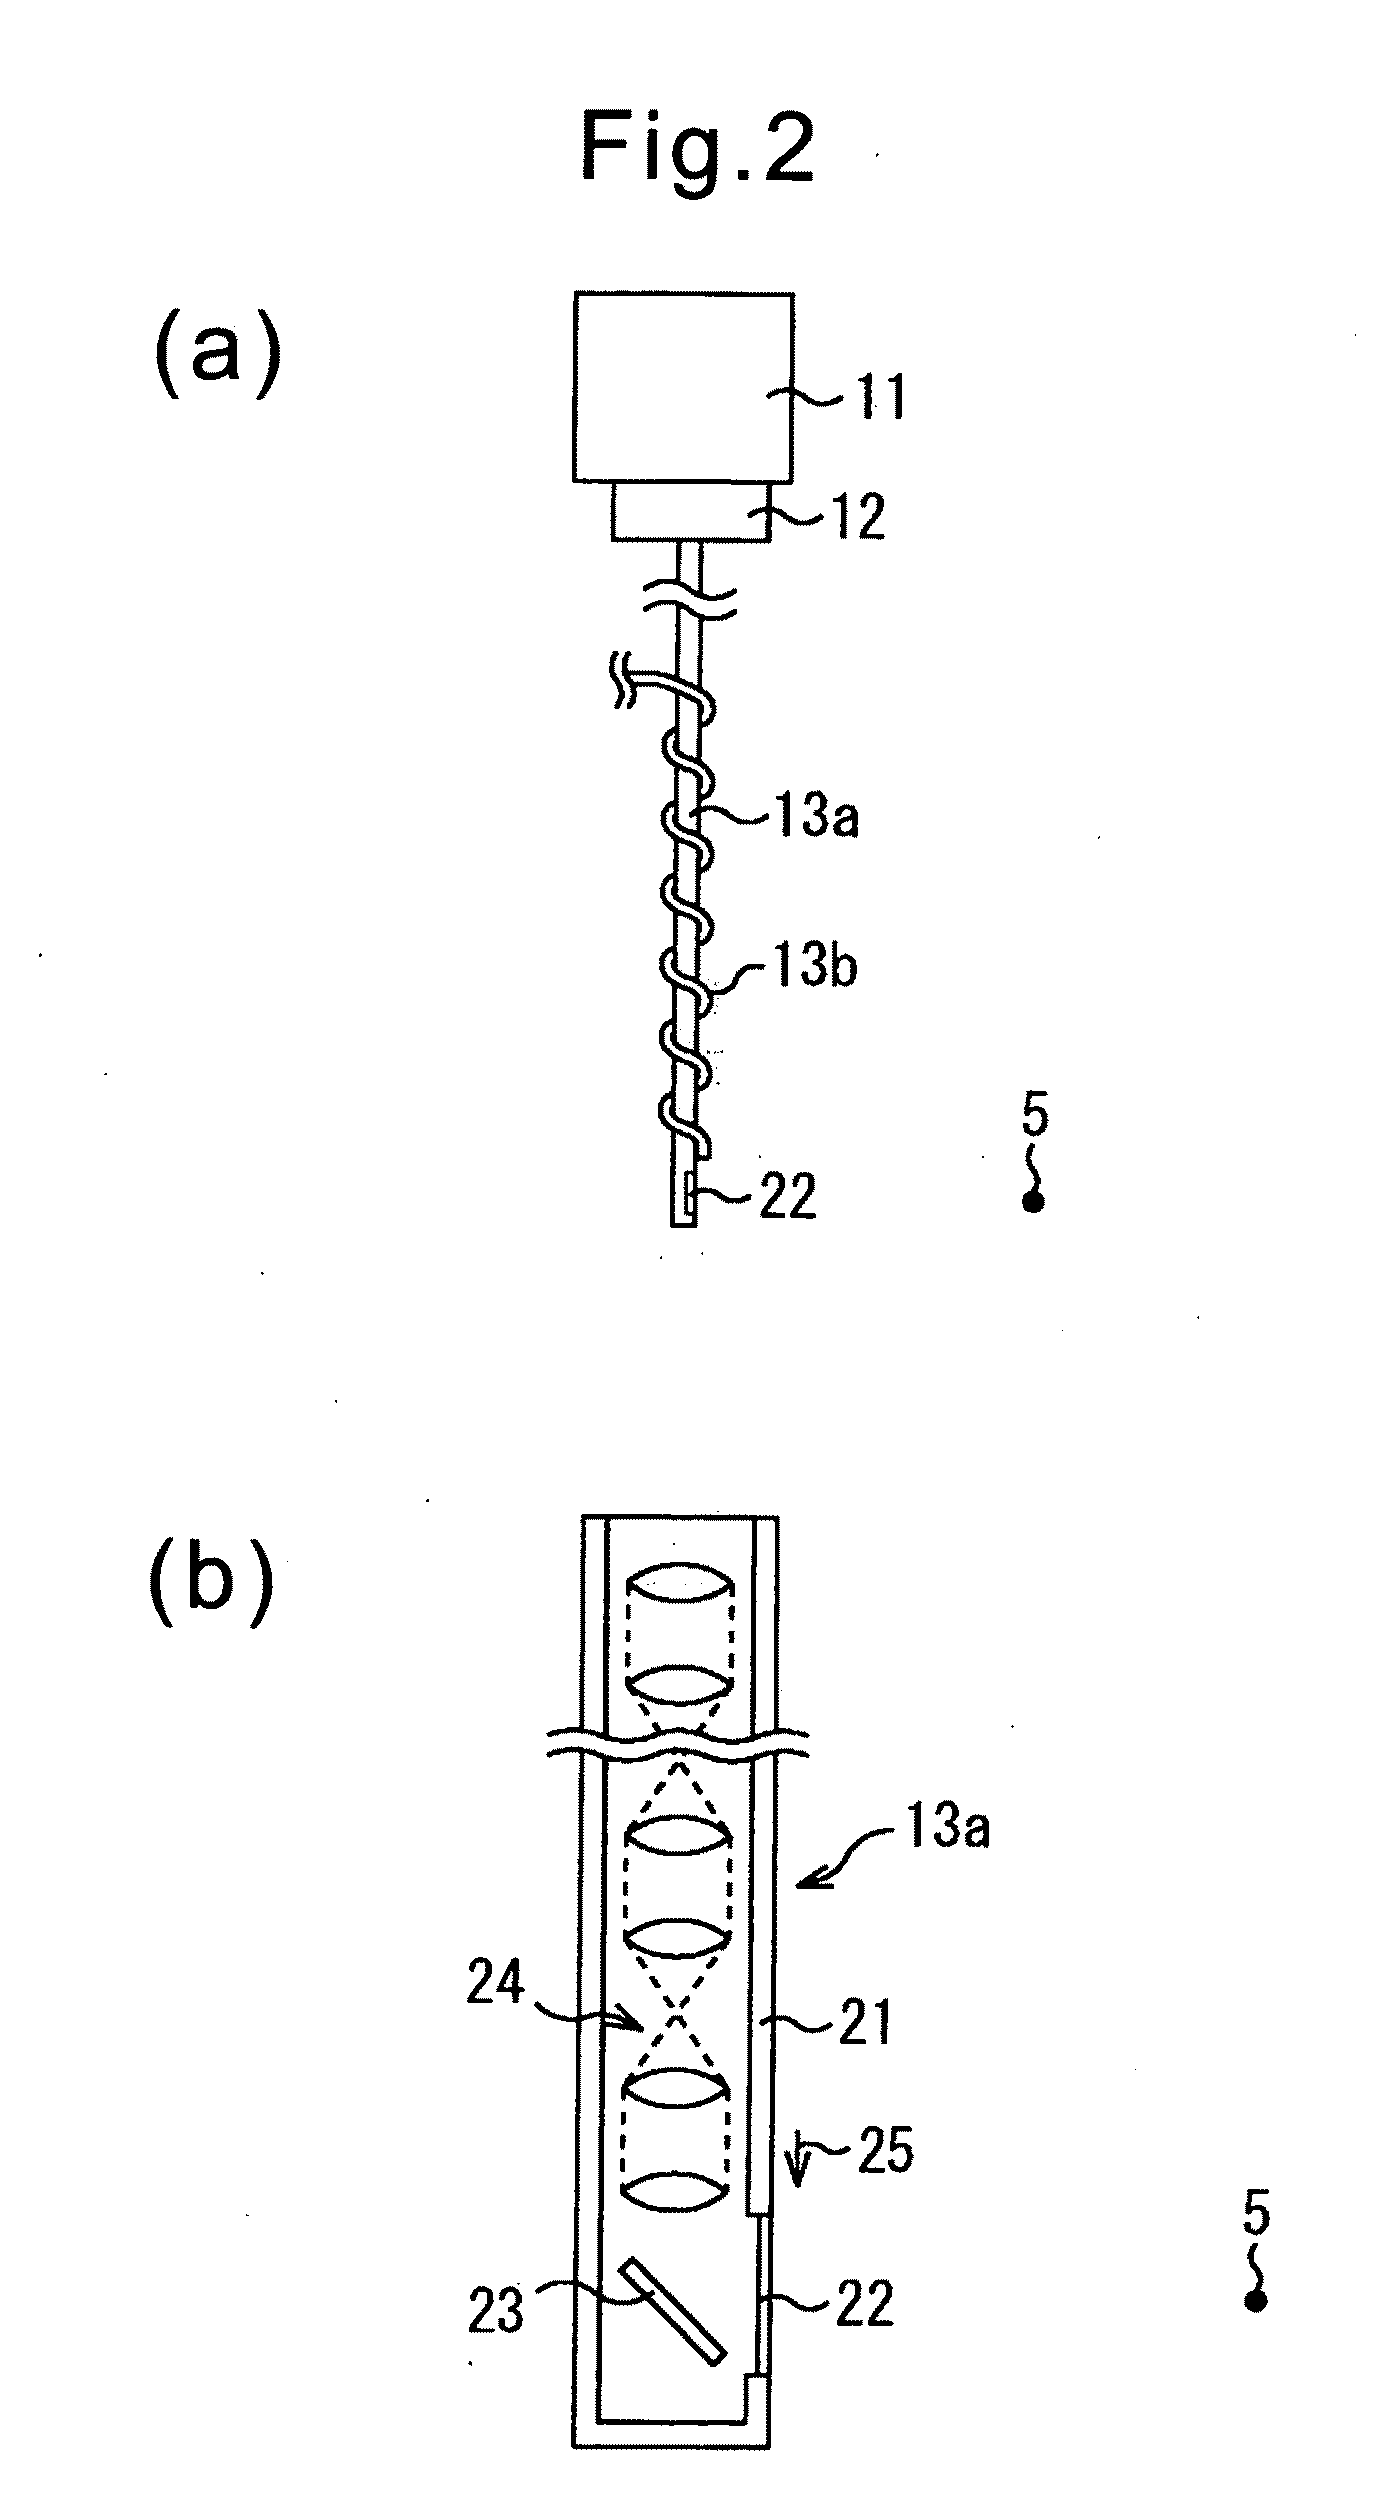 System and method for monitoring of welding state